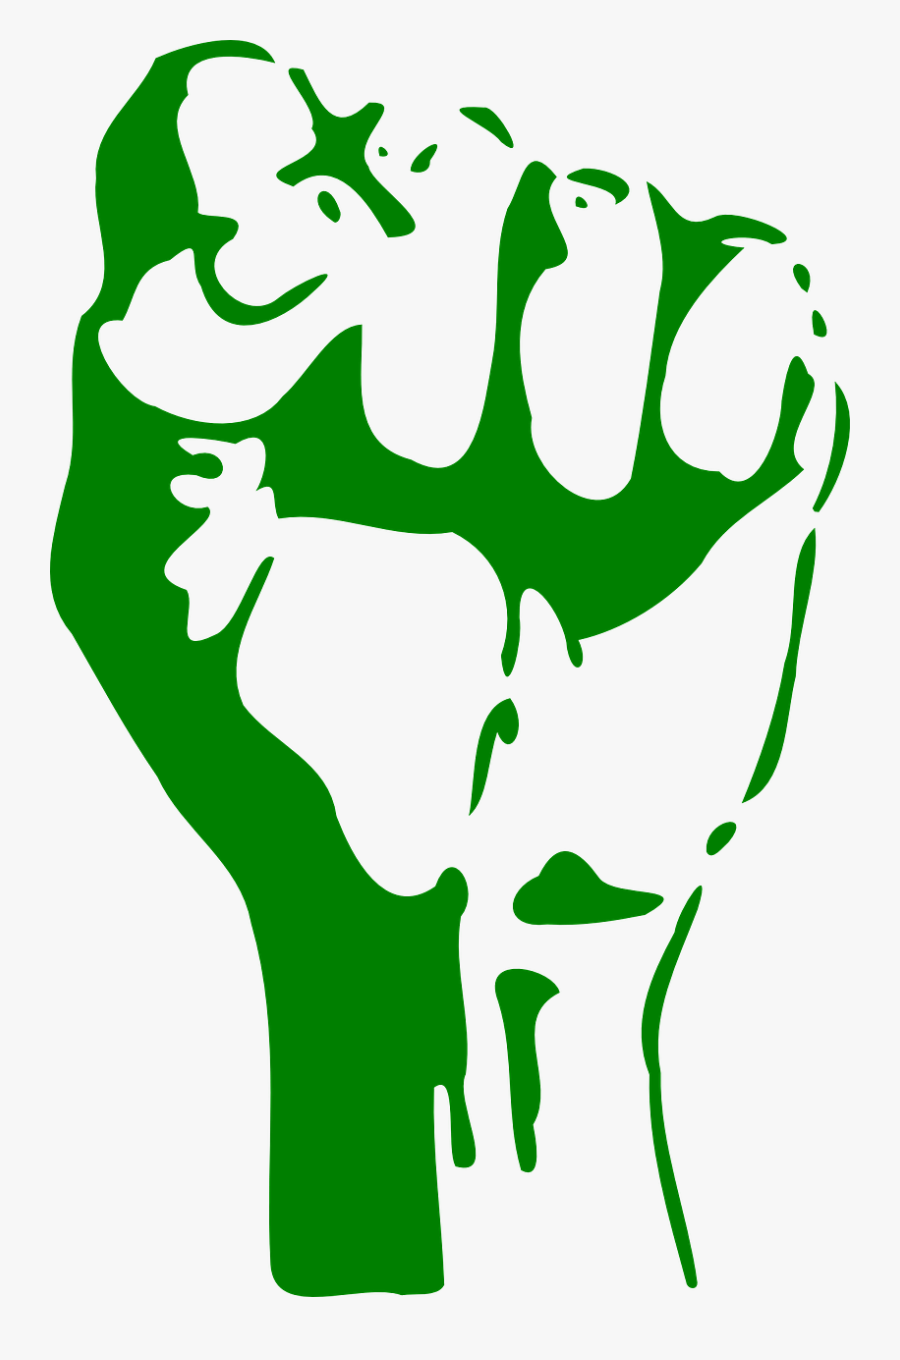 Transparent Strength Clipart - Civil Rights Movement Clipart, Transparent Clipart